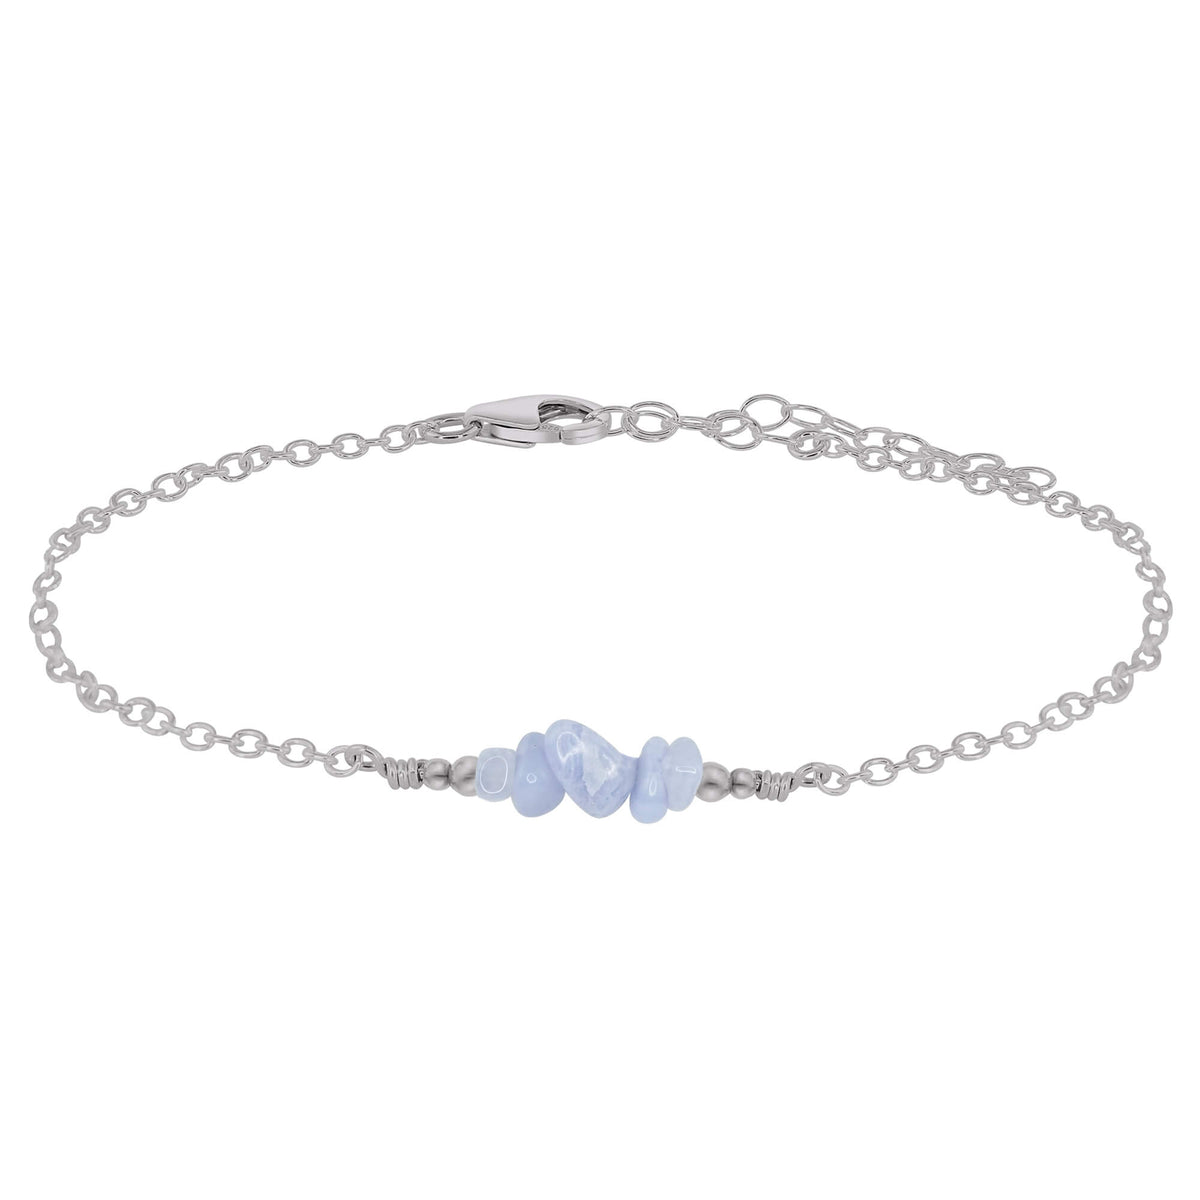 Chip Bead Bar Anklet - Blue Lace Agate - Stainless Steel - Luna Tide Handmade Jewellery